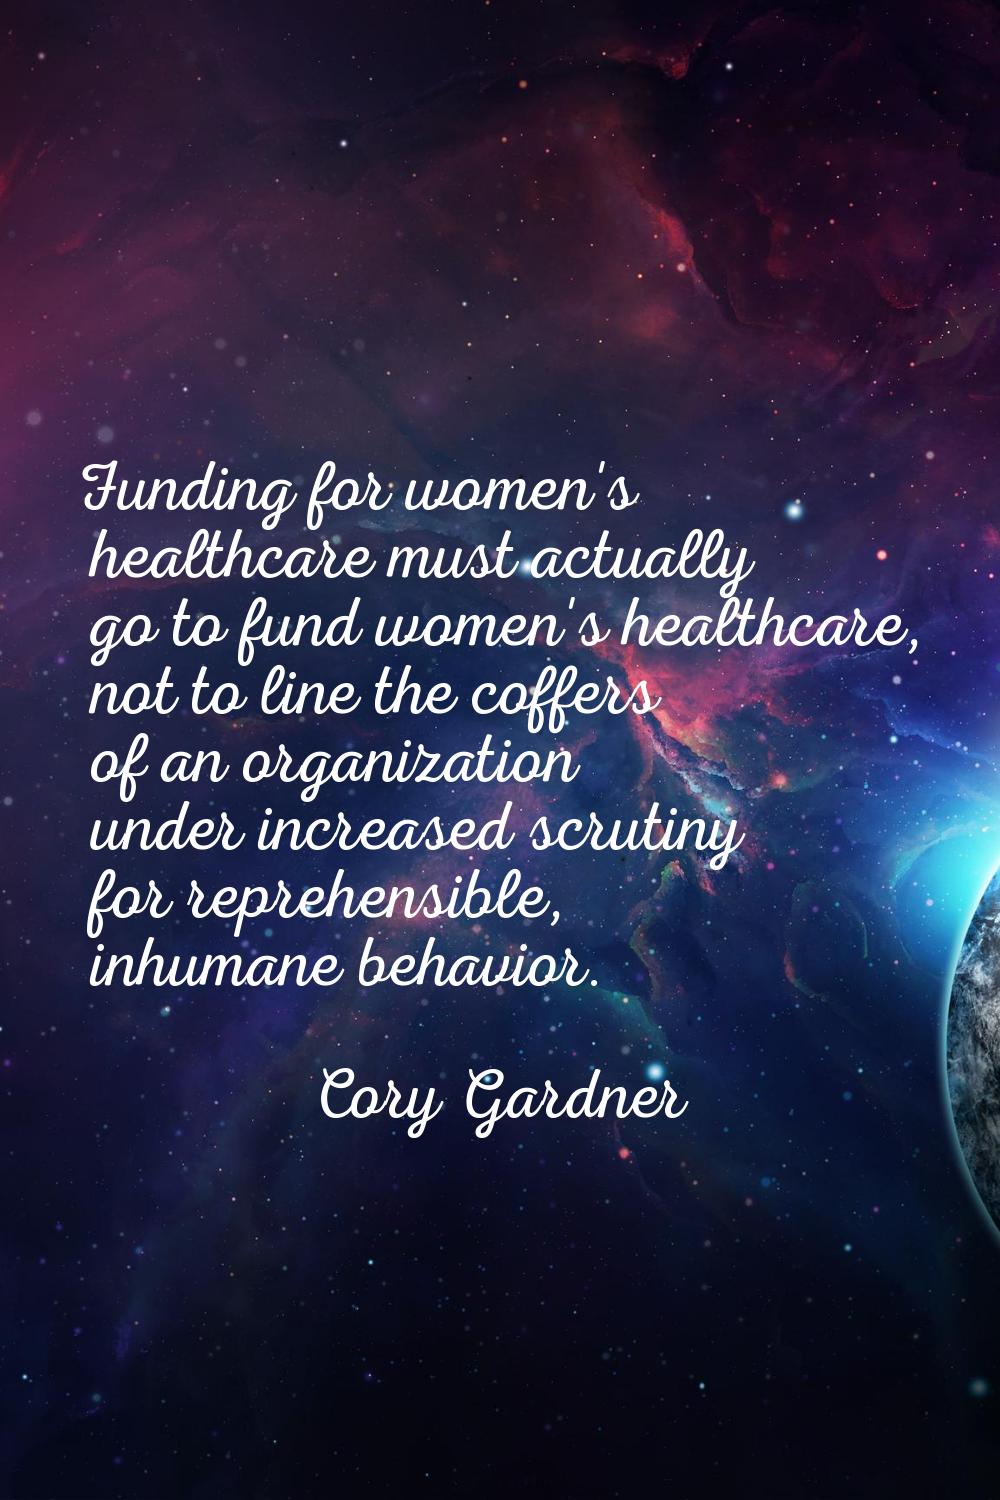 Funding for women's healthcare must actually go to fund women's healthcare, not to line the coffers